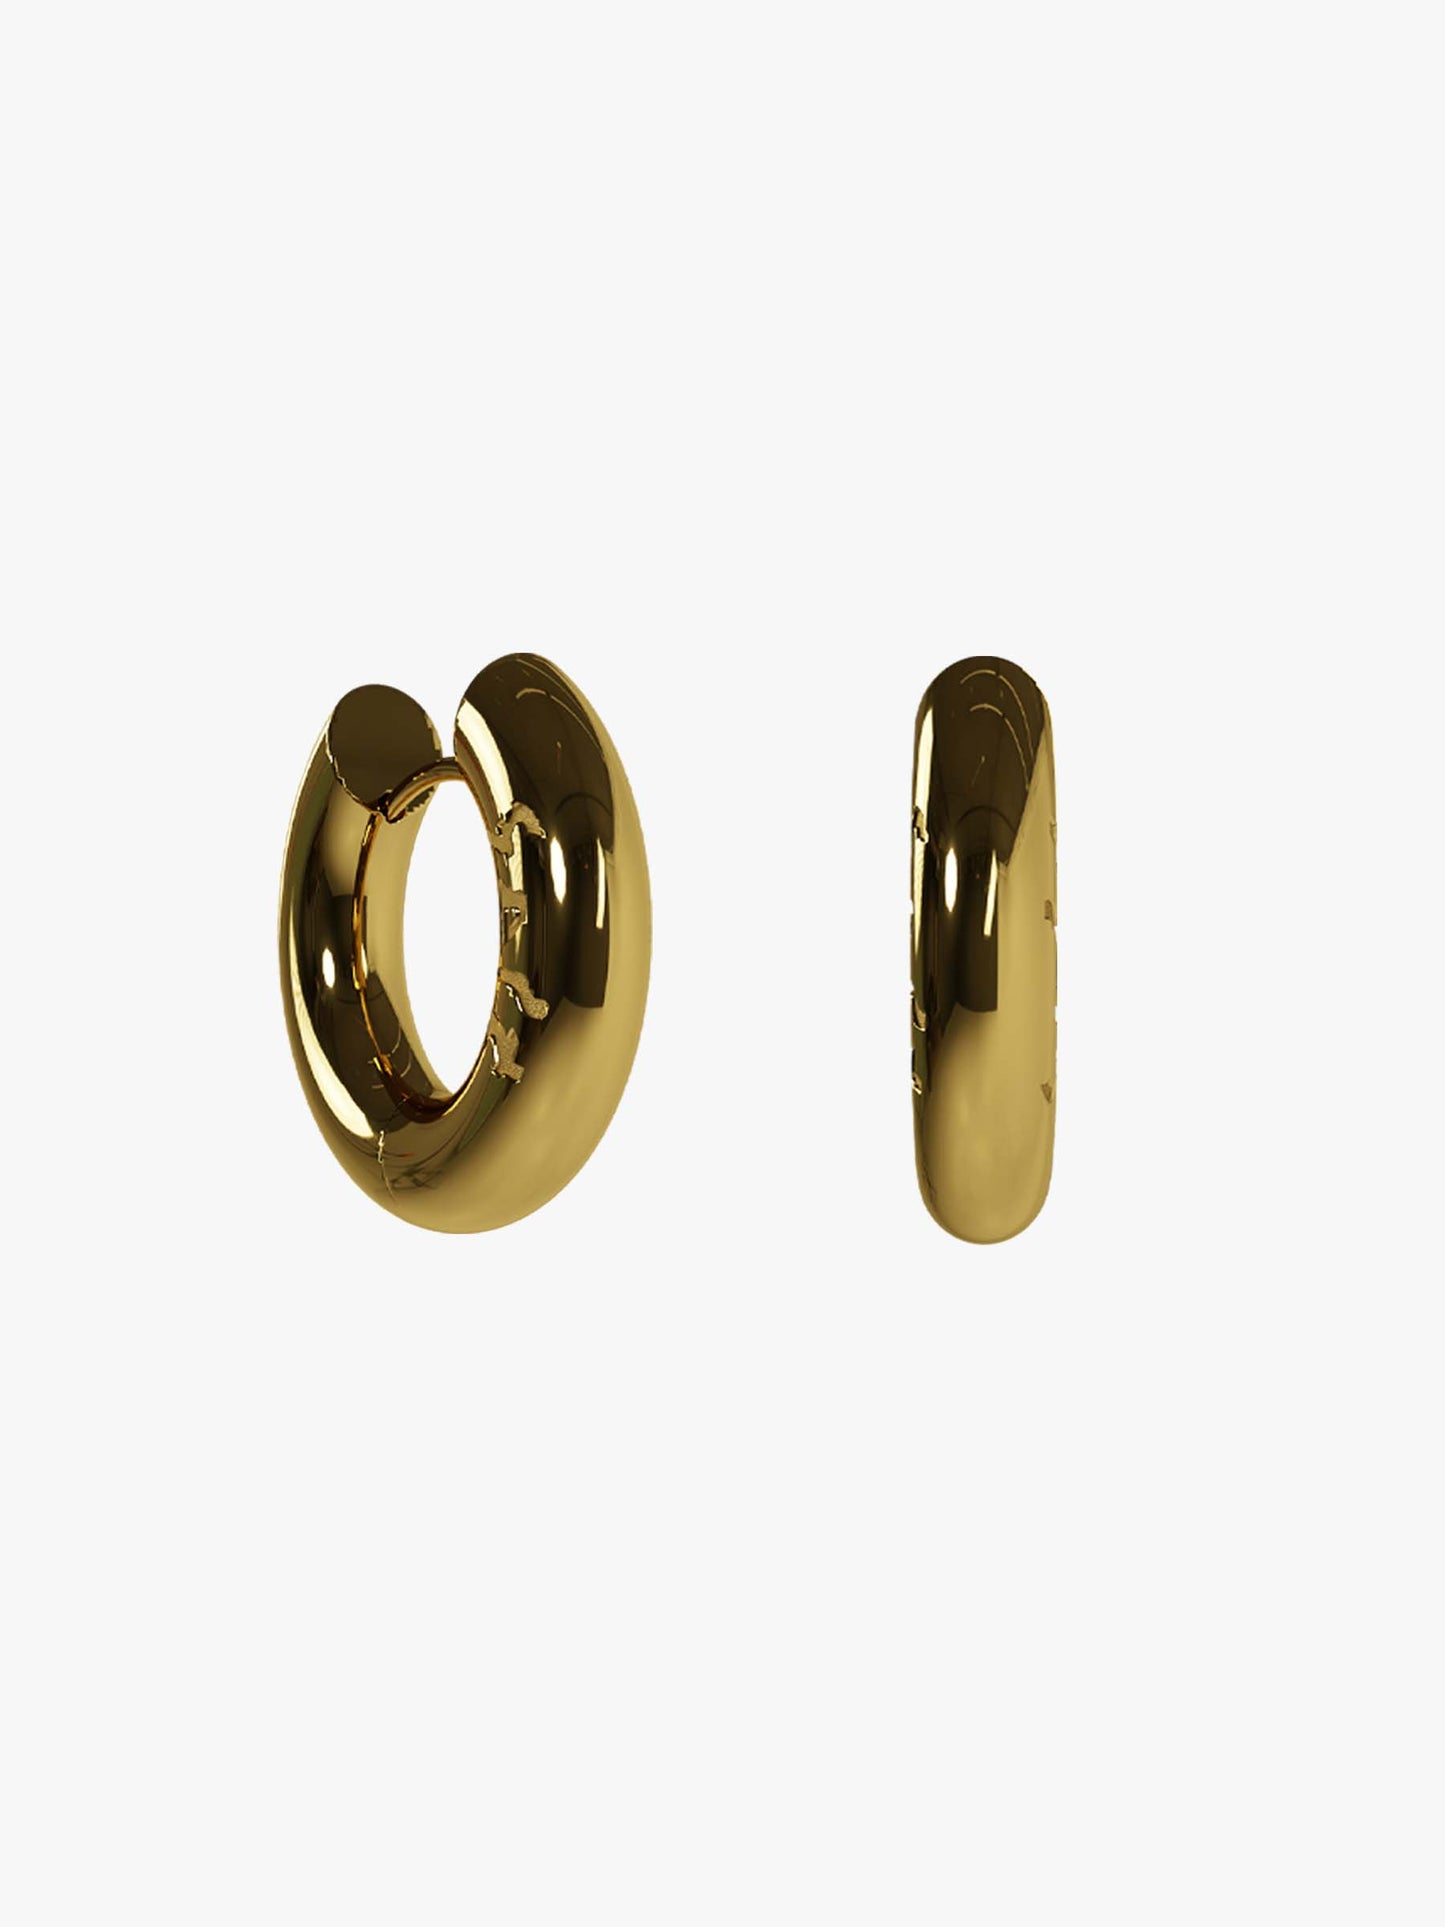 Isa gold 5mm earring (pair)